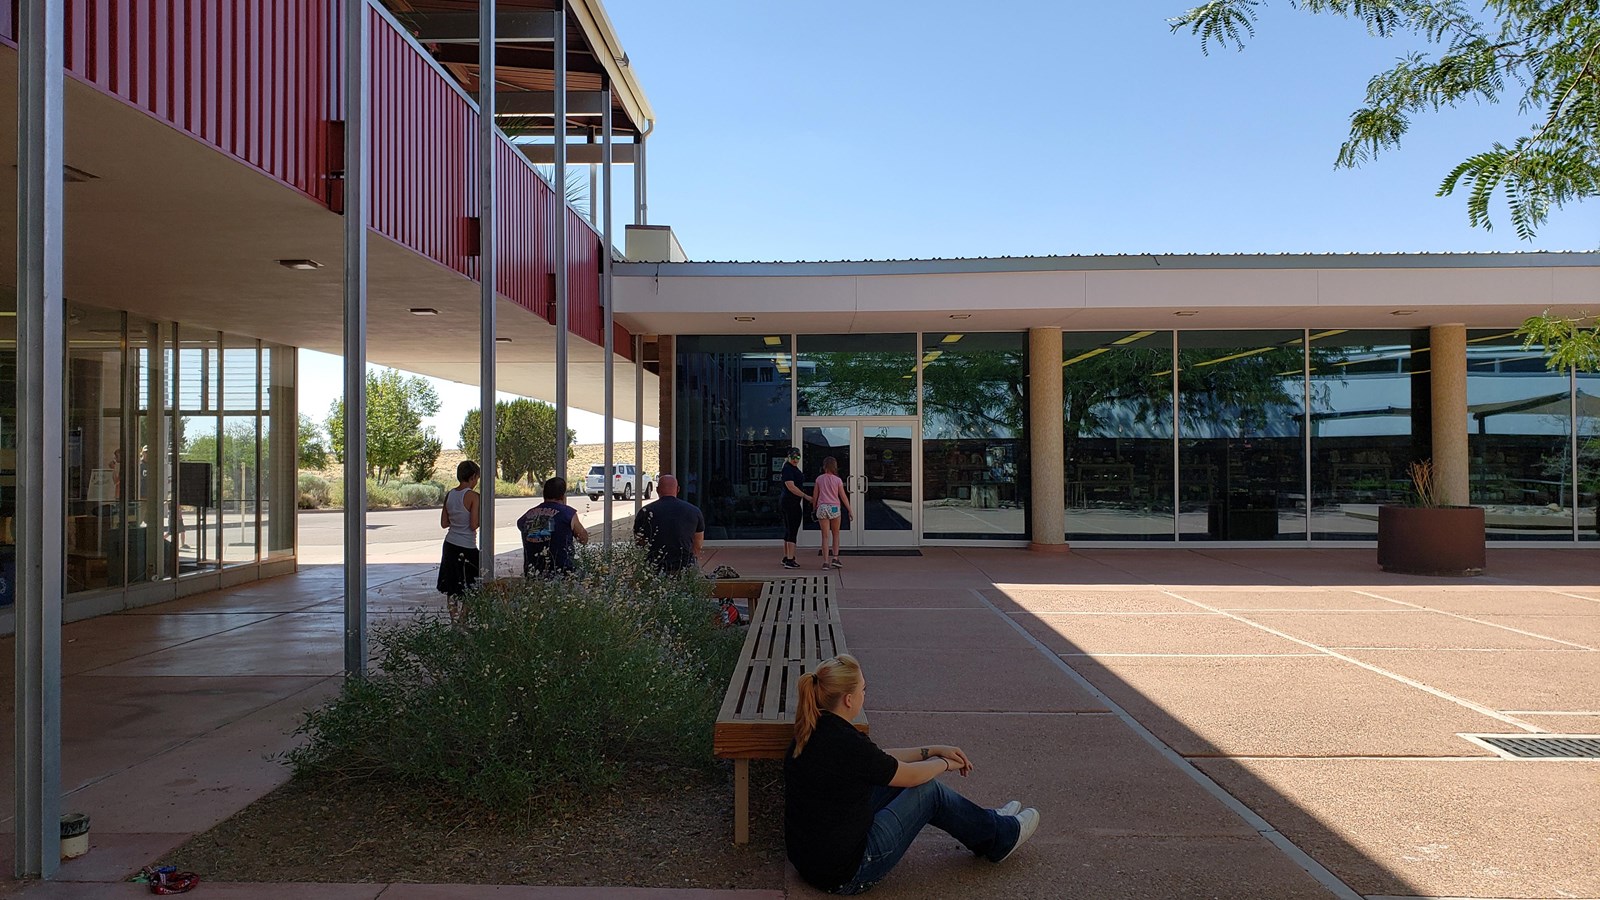 Mid-Century style architecture around people in a shady plaza.